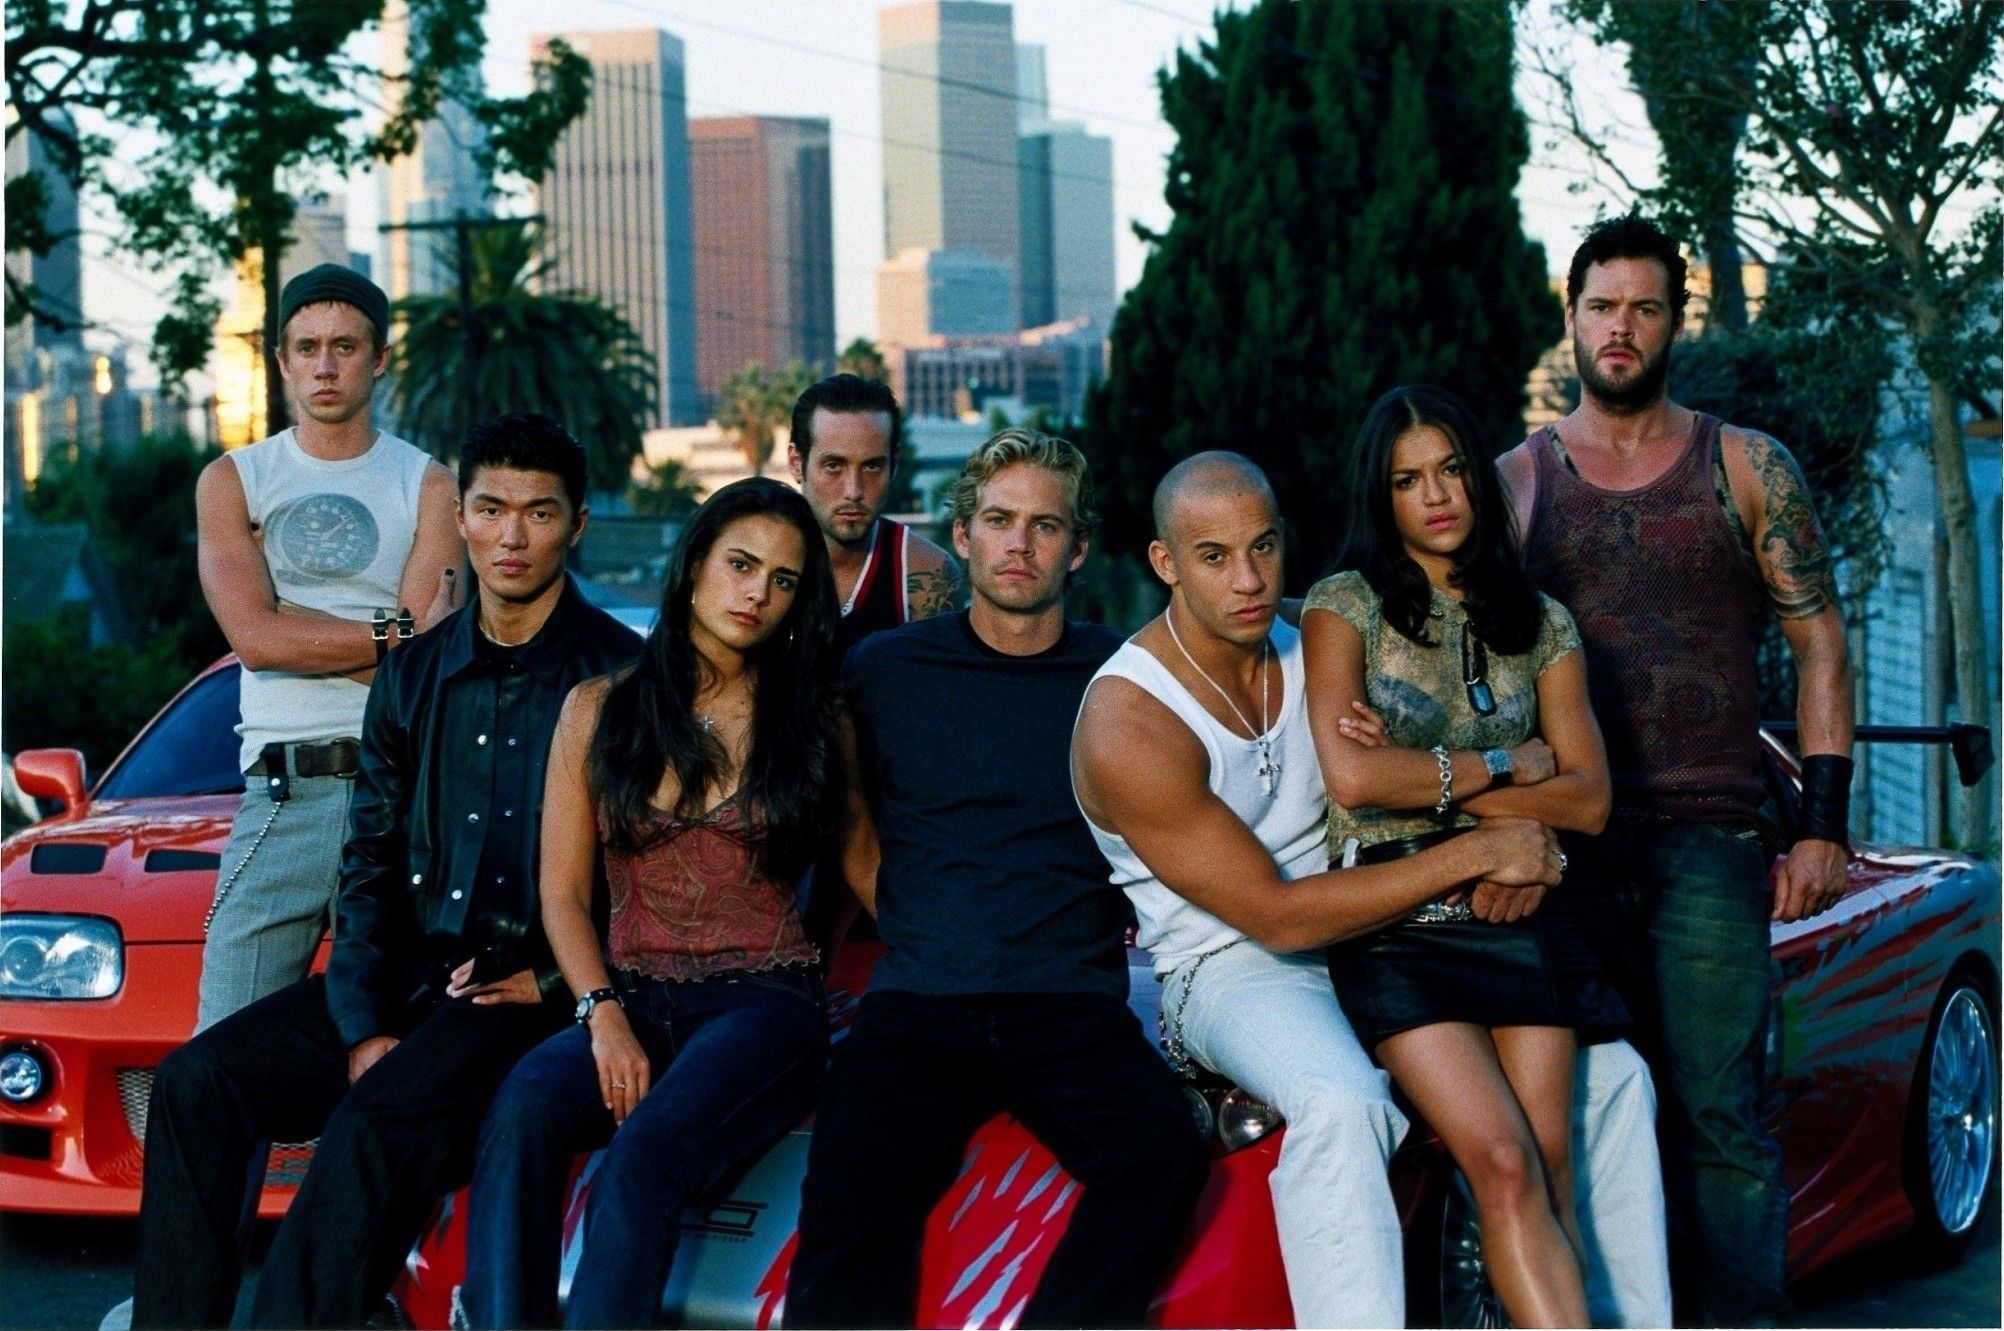 fast and furious cast group of people movies wallpaper